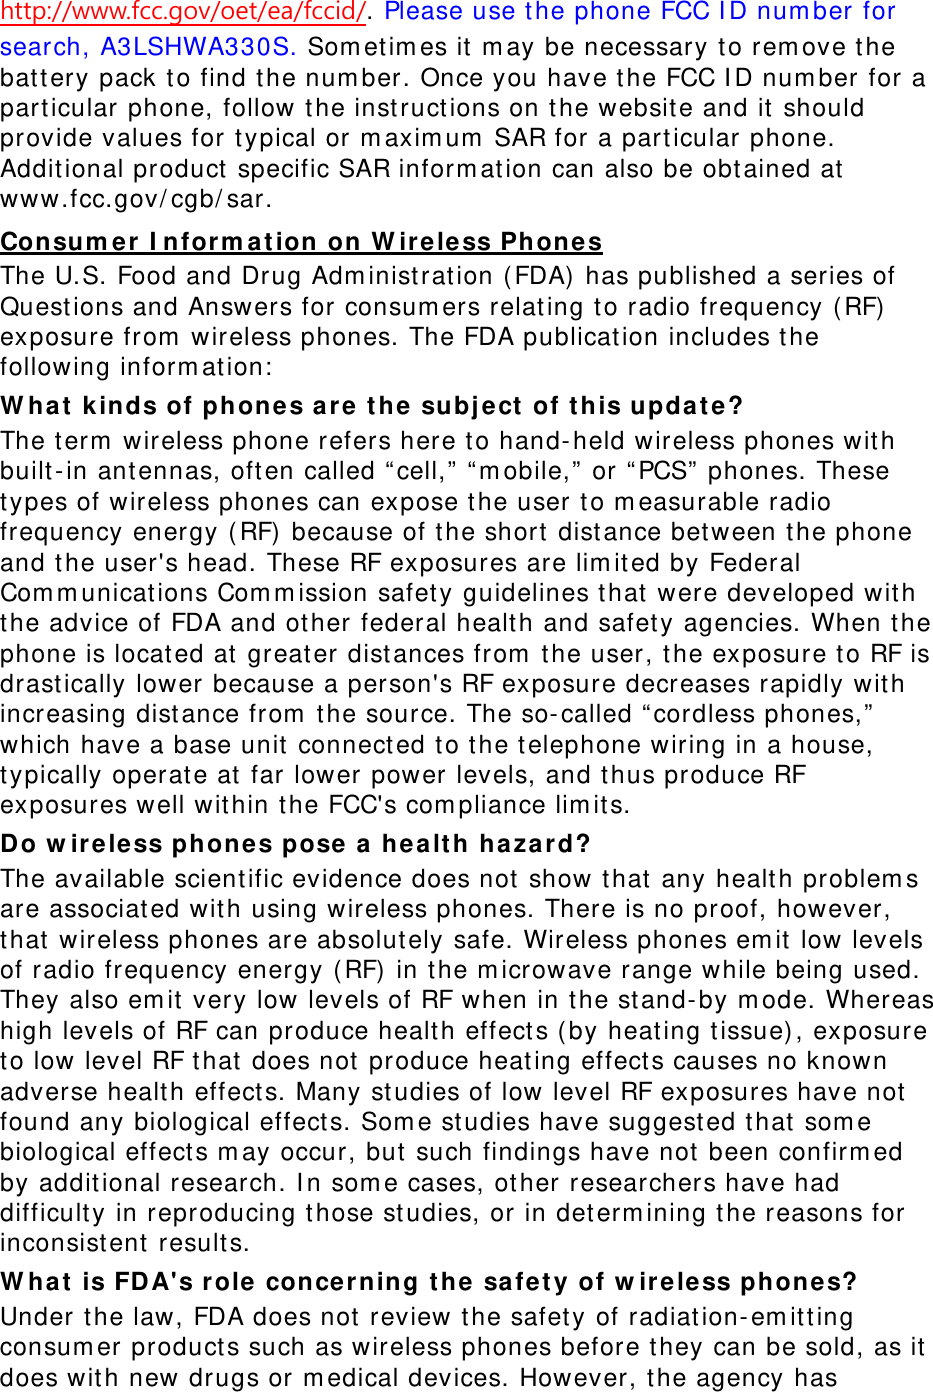 http://www.fcc.gov/oet/ea/fccid/. Please use the phone FCC ID number for search, A3LSHWA330S. Sometimes it may be necessary to remove the battery pack to find the number. Once you have the FCC ID number for a particular phone, follow the instructions on the website and it should provide values for typical or maximum SAR for a particular phone. Additional product specific SAR information can also be obtained at www.fcc.gov/cgb/sar. Consumer Information on Wireless Phones The U.S. Food and Drug Administration (FDA) has published a series of Questions and Answers for consumers relating to radio frequency (RF) exposure from wireless phones. The FDA publication includes the following information: What kinds of phones are the subject of this update? The term wireless phone refers here to hand-held wireless phones with built-in antennas, often called “cell,” “mobile,” or “PCS” phones. These types of wireless phones can expose the user to measurable radio frequency energy (RF) because of the short distance between the phone and the user&apos;s head. These RF exposures are limited by Federal Communications Commission safety guidelines that were developed with the advice of FDA and other federal health and safety agencies. When the phone is located at greater distances from the user, the exposure to RF is drastically lower because a person&apos;s RF exposure decreases rapidly with increasing distance from the source. The so-called “cordless phones,” which have a base unit connected to the telephone wiring in a house, typically operate at far lower power levels, and thus produce RF exposures well within the FCC&apos;s compliance limits. Do wireless phones pose a health hazard? The available scientific evidence does not show that any health problems are associated with using wireless phones. There is no proof, however, that wireless phones are absolutely safe. Wireless phones emit low levels of radio frequency energy (RF) in the microwave range while being used. They also emit very low levels of RF when in the stand-by mode. Whereas high levels of RF can produce health effects (by heating tissue), exposure to low level RF that does not produce heating effects causes no known adverse health effects. Many studies of low level RF exposures have not found any biological effects. Some studies have suggested that some biological effects may occur, but such findings have not been confirmed by additional research. In some cases, other researchers have had difficulty in reproducing those studies, or in determining the reasons for inconsistent results. What is FDA&apos;s role concerning the safety of wireless phones? Under the law, FDA does not review the safety of radiation-emitting consumer products such as wireless phones before they can be sold, as it does with new drugs or medical devices. However, the agency has 